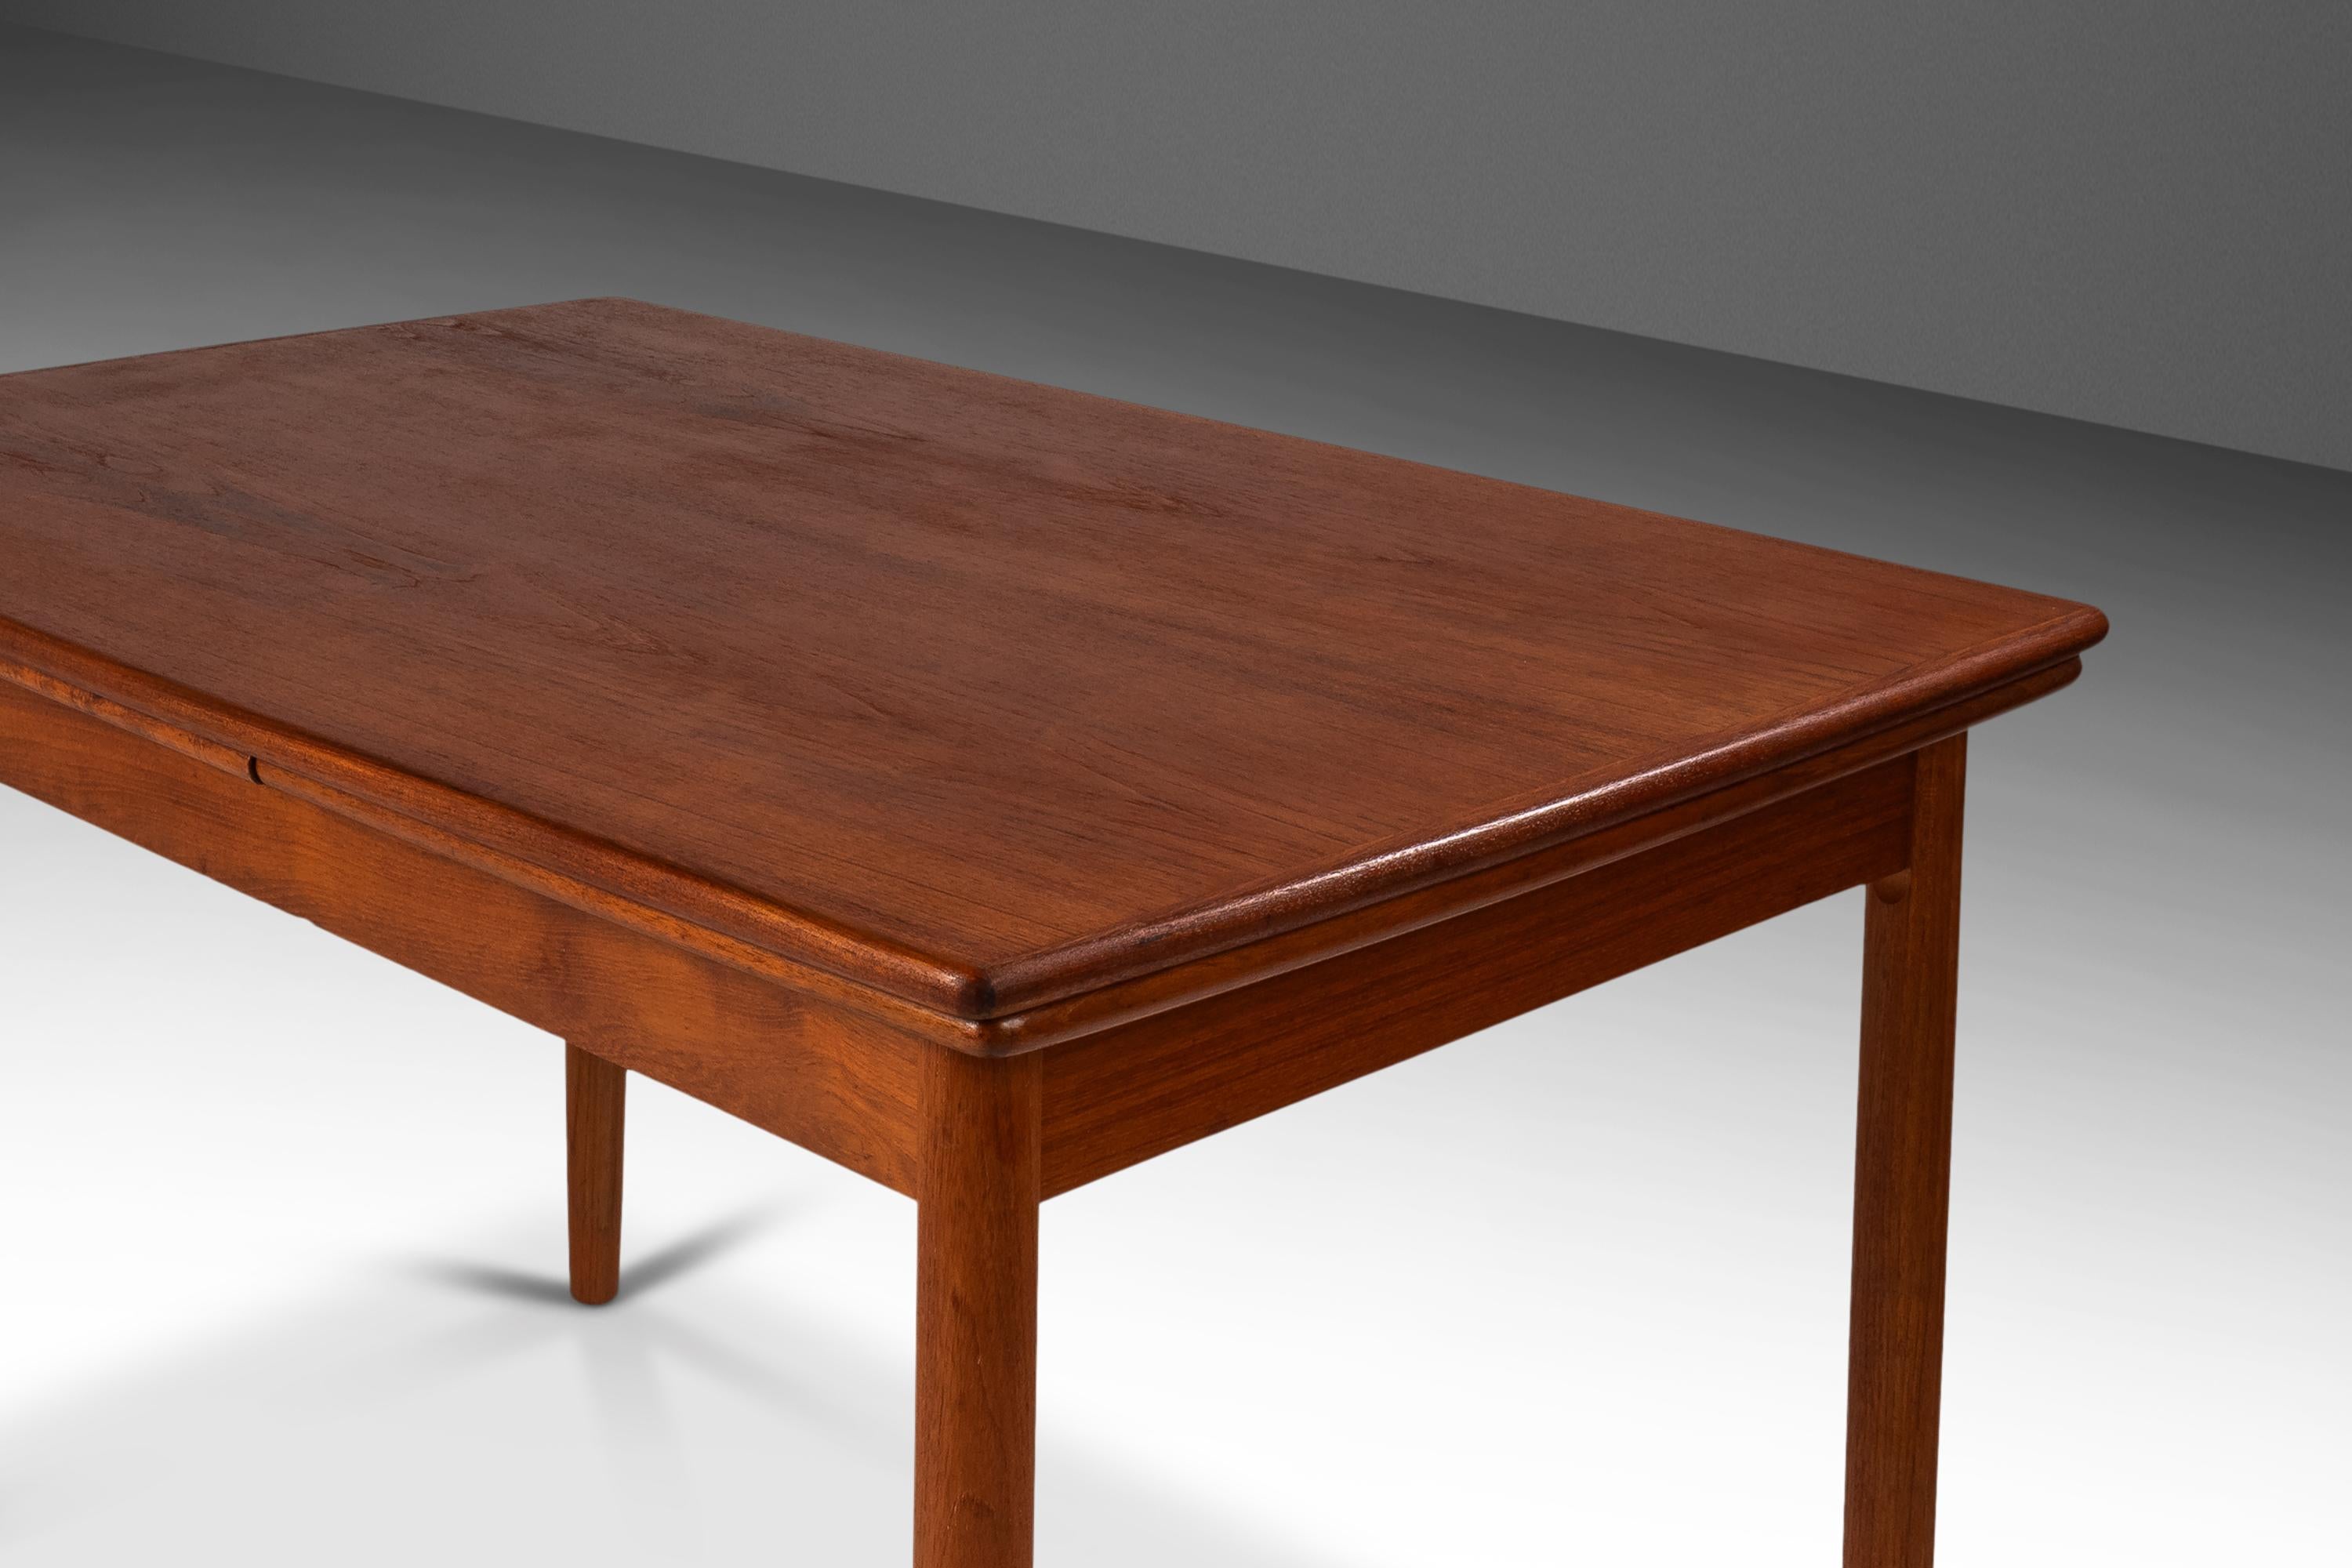 Danish Modern Expansion Dining Table in Teak w/ Stow-In-Table Leaves, c. 1960s For Sale 7